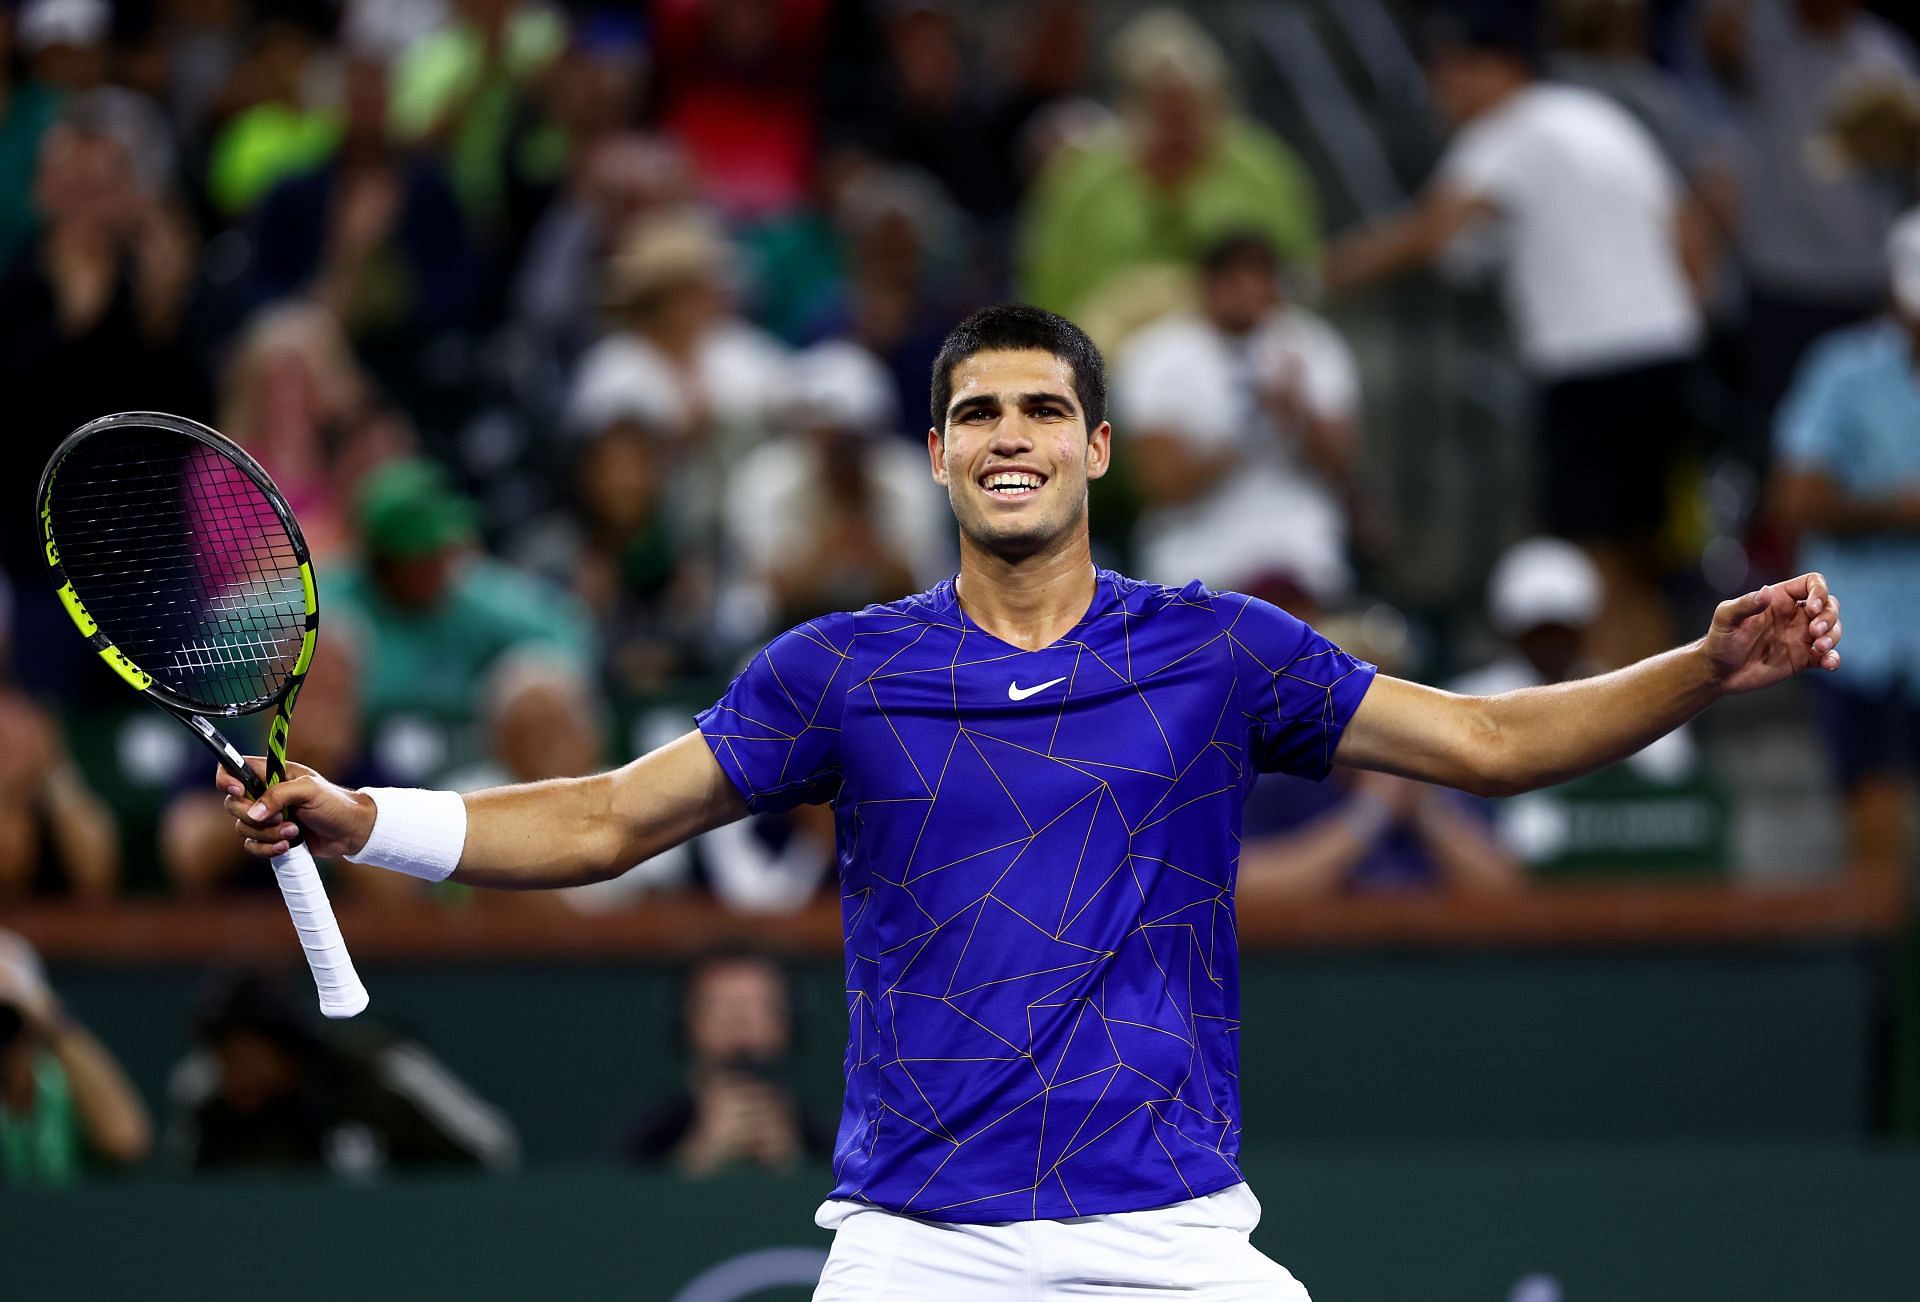 Indian Wells 2023 Schedule Today: TV schedule, start time, order of play, live stream details